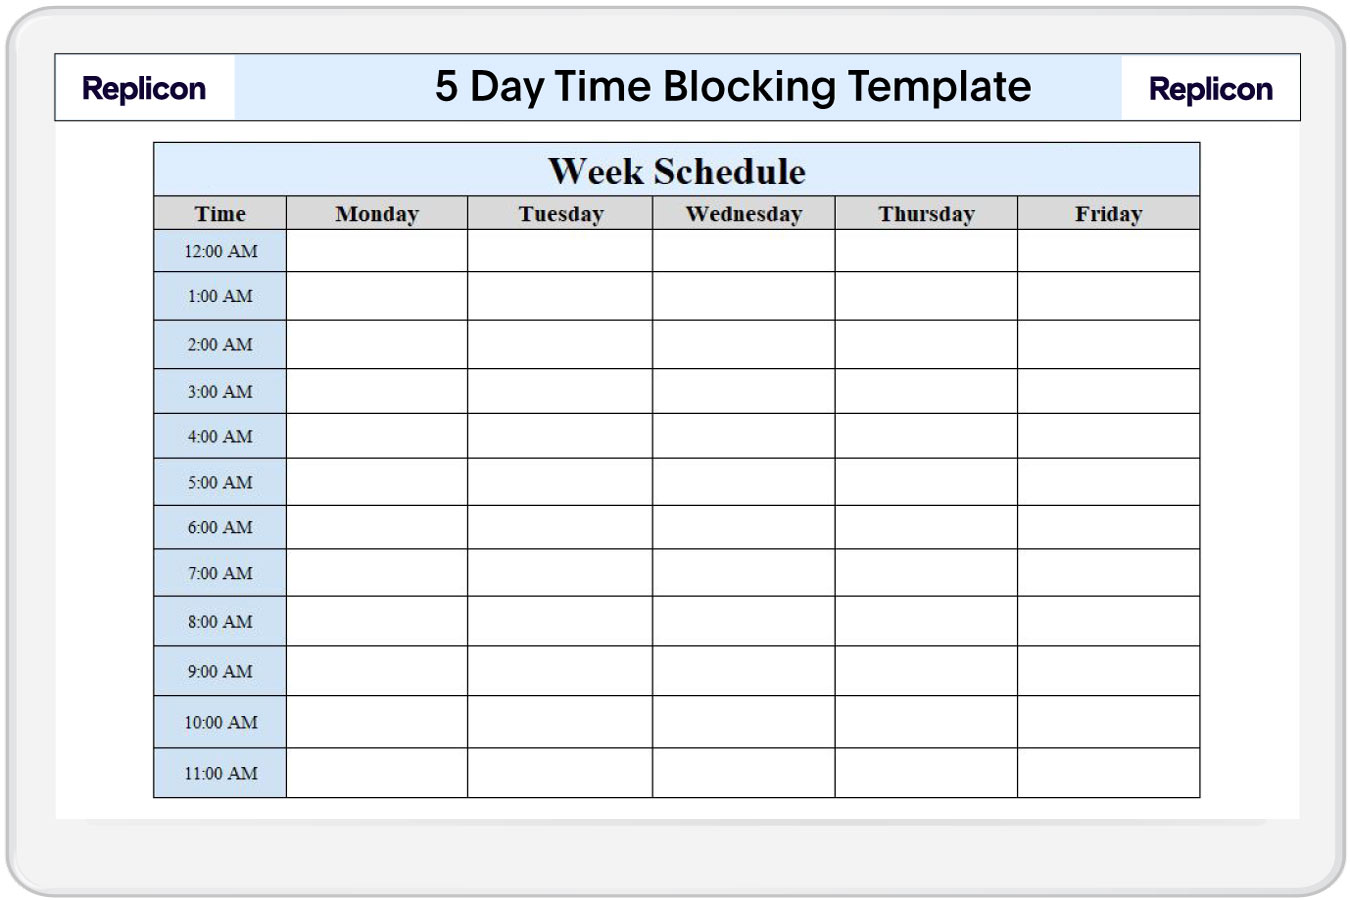 a preview of five-day time blocking template from Replicon